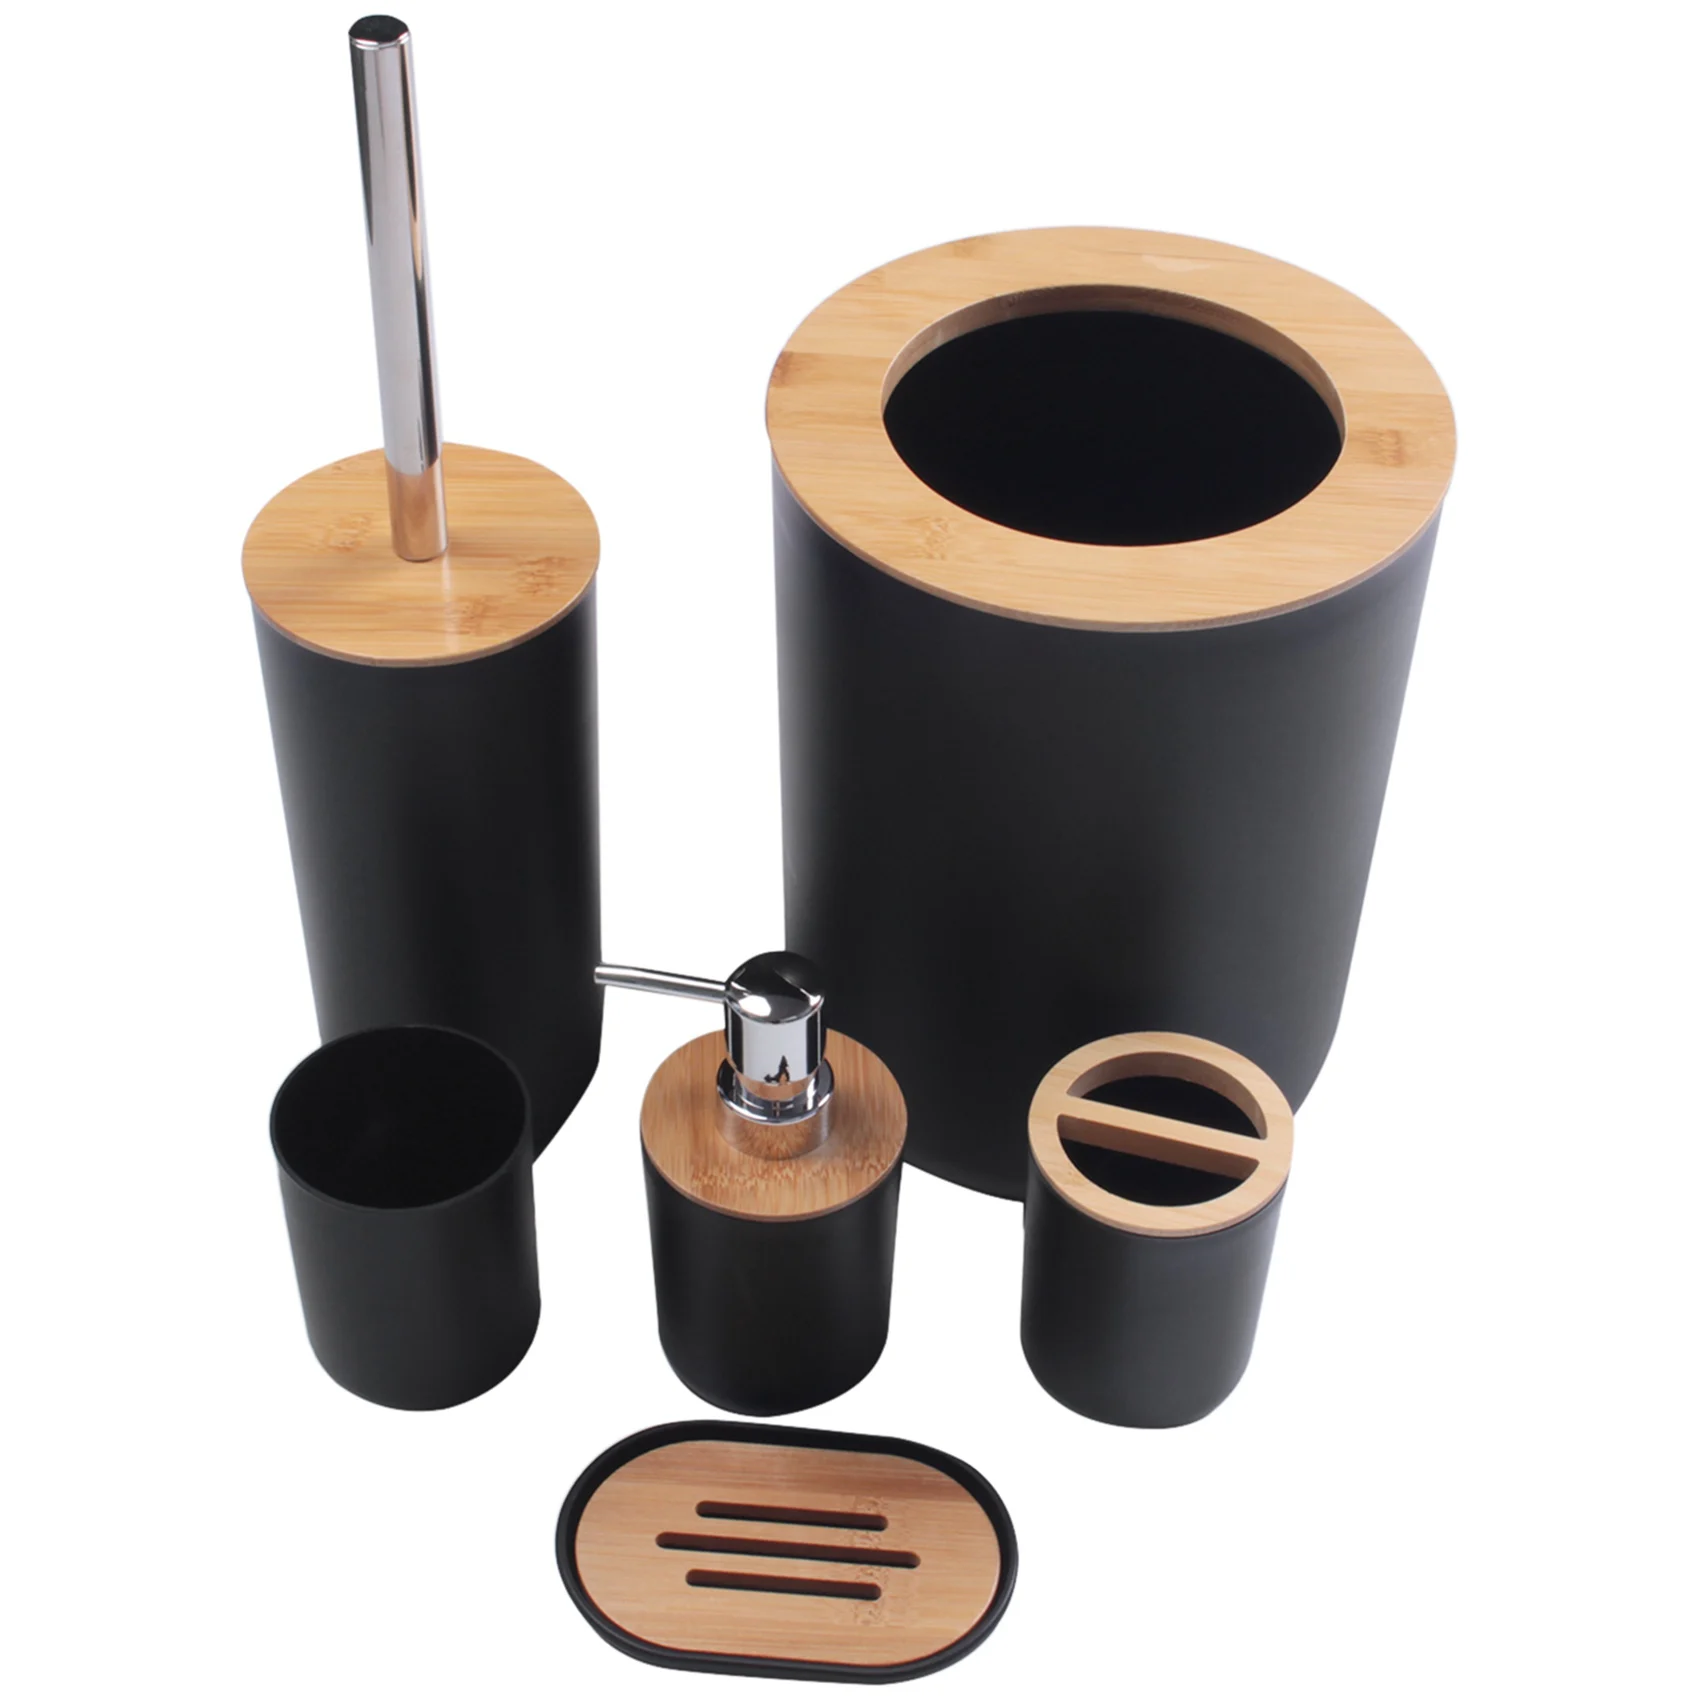 

6-Piece Bamboo Bath Accessory Set Environmentally Friendly Toilet Accessory Set with Lotion Dispenser Etc. Black